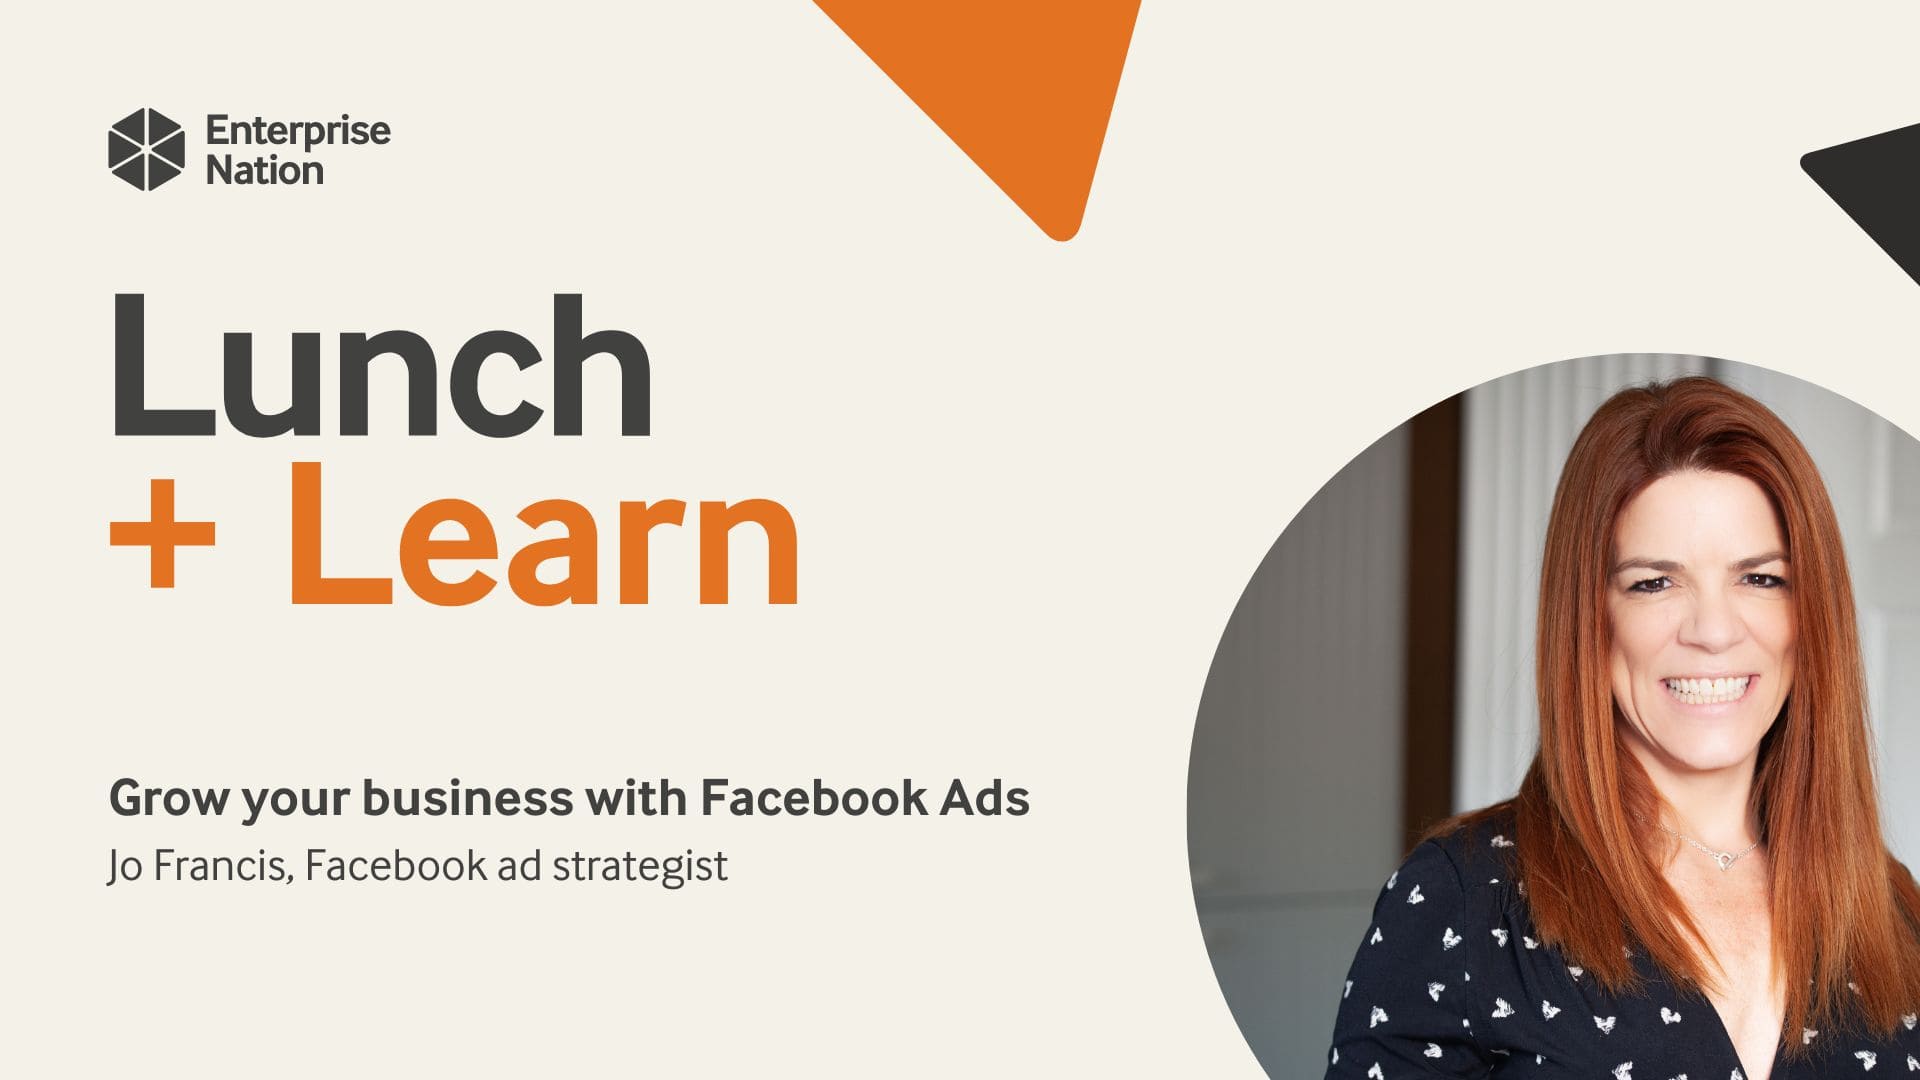 Lunch and Learn: Grow your business with Facebook Ads